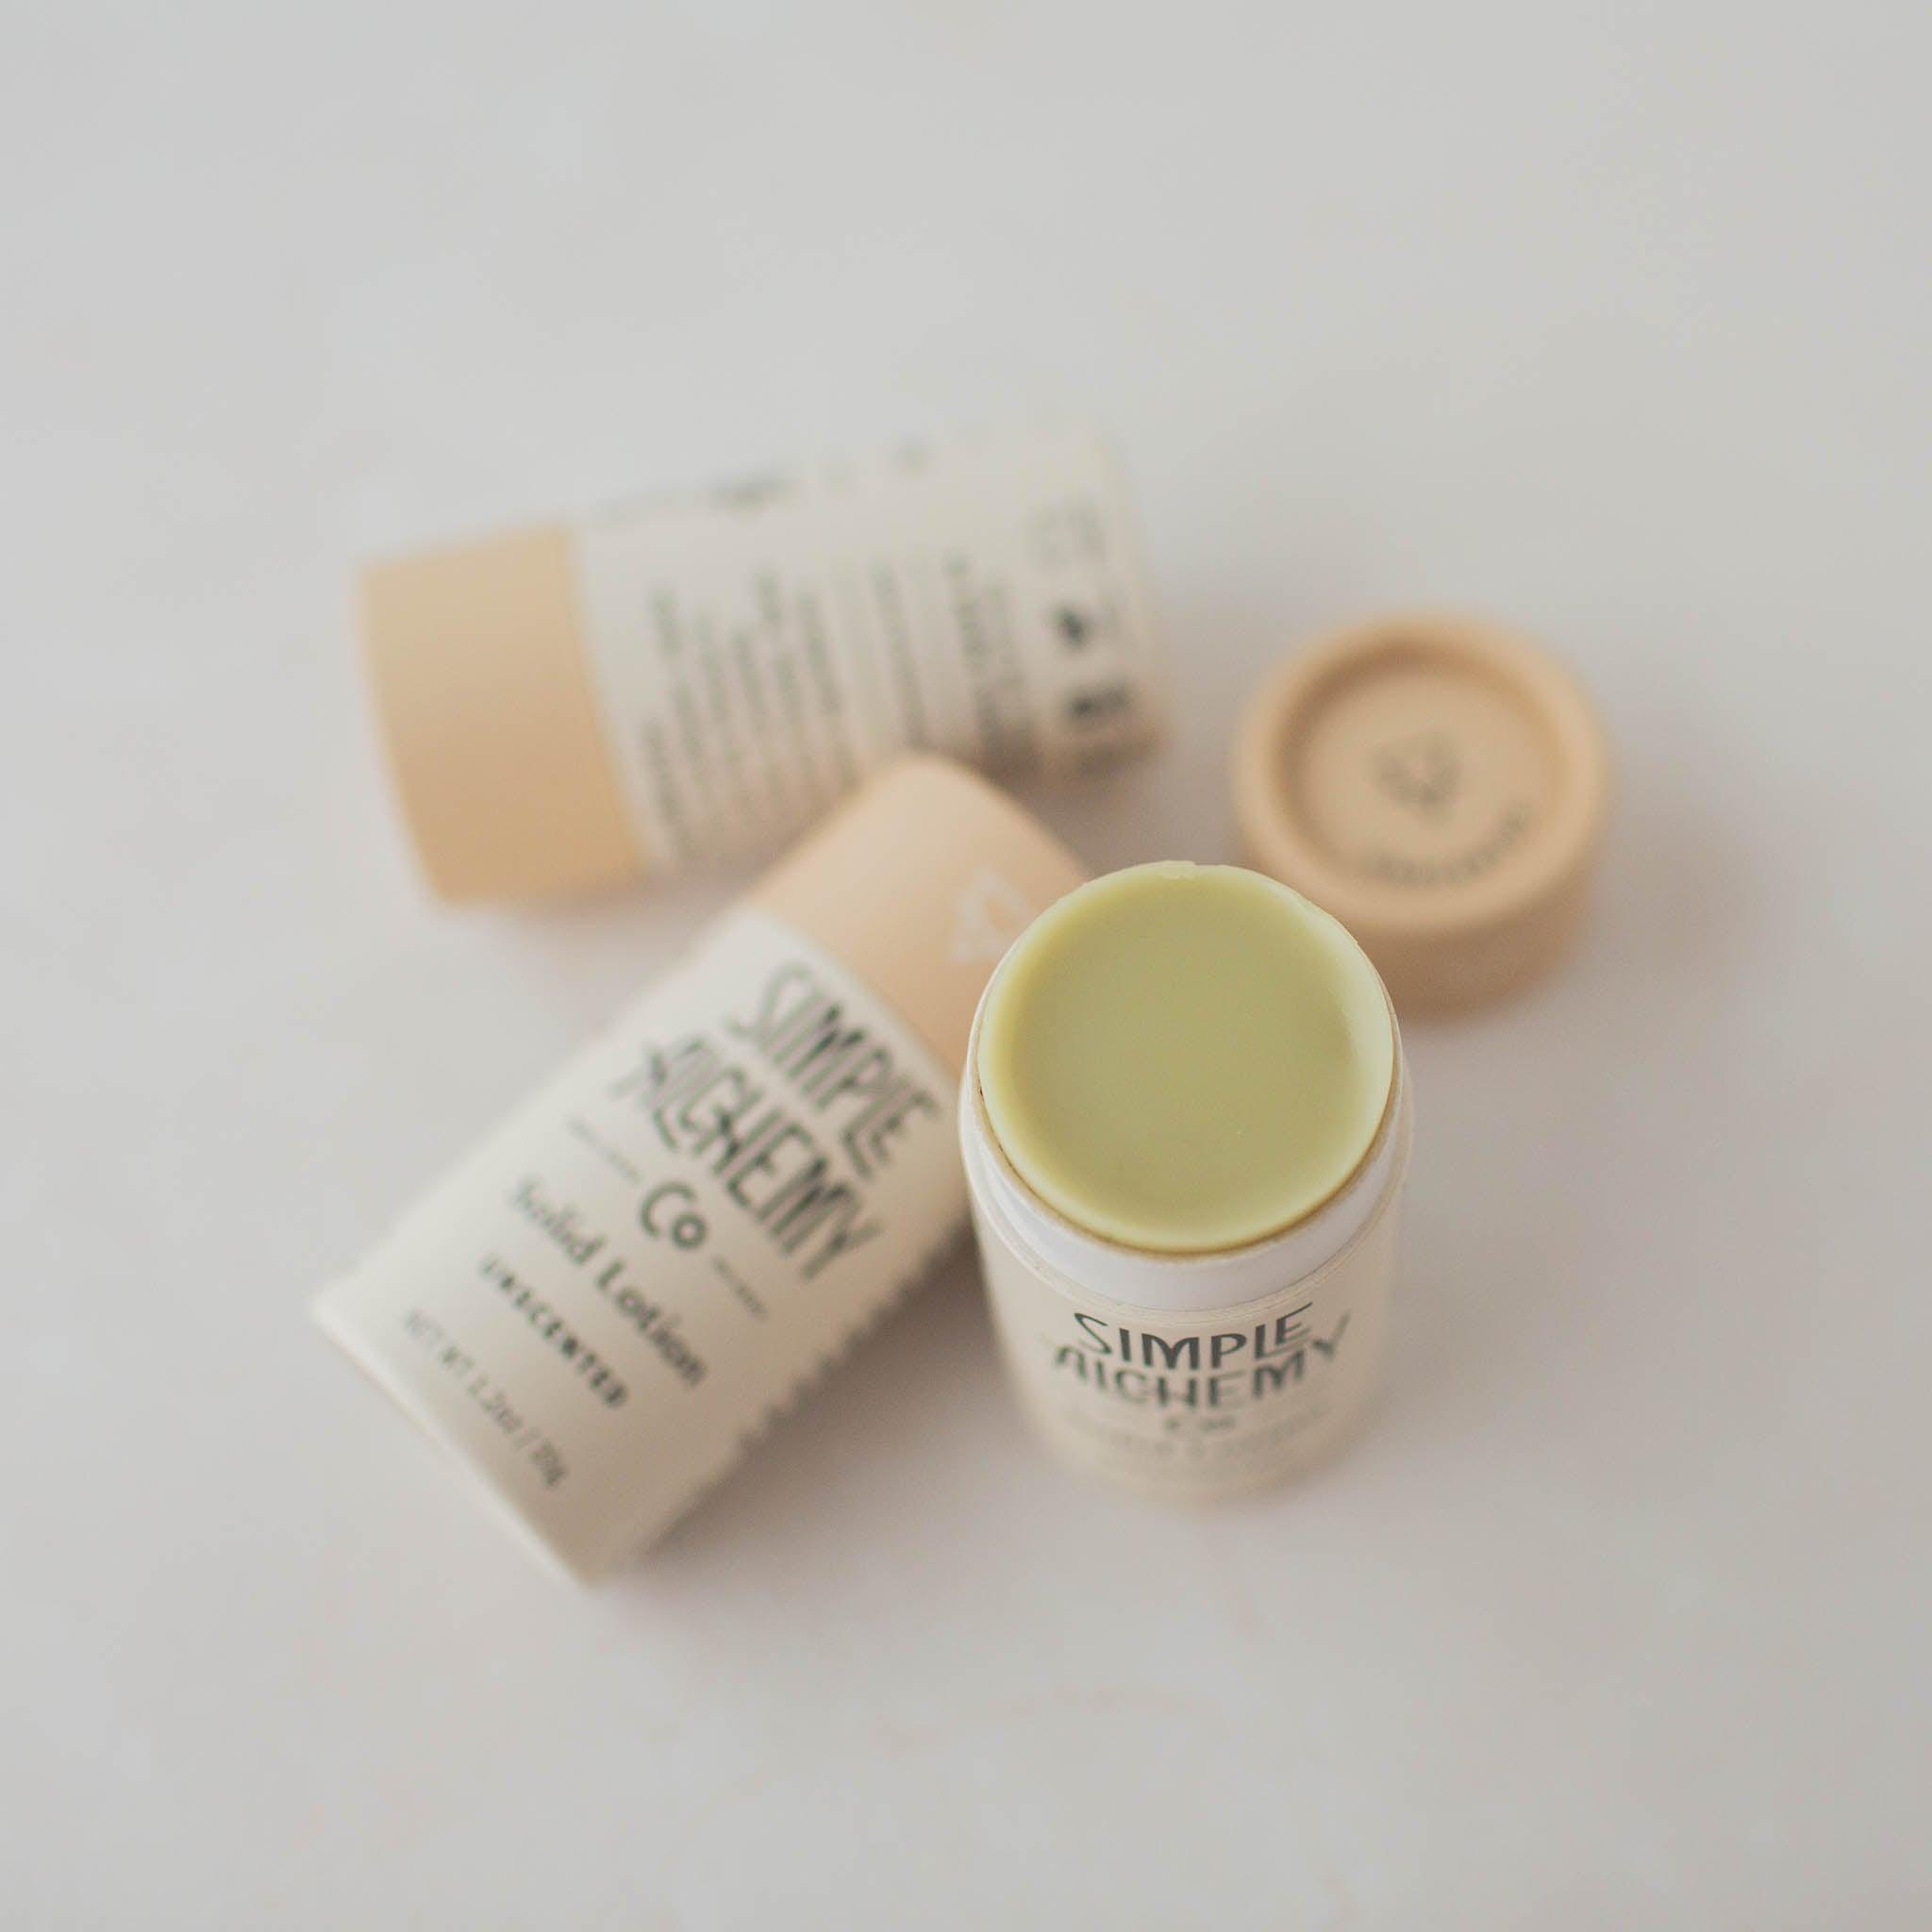 Trio of cream colored compostable tubes of Unscented Solid Lotion, one with cap off showing pale matcha colored lotion.